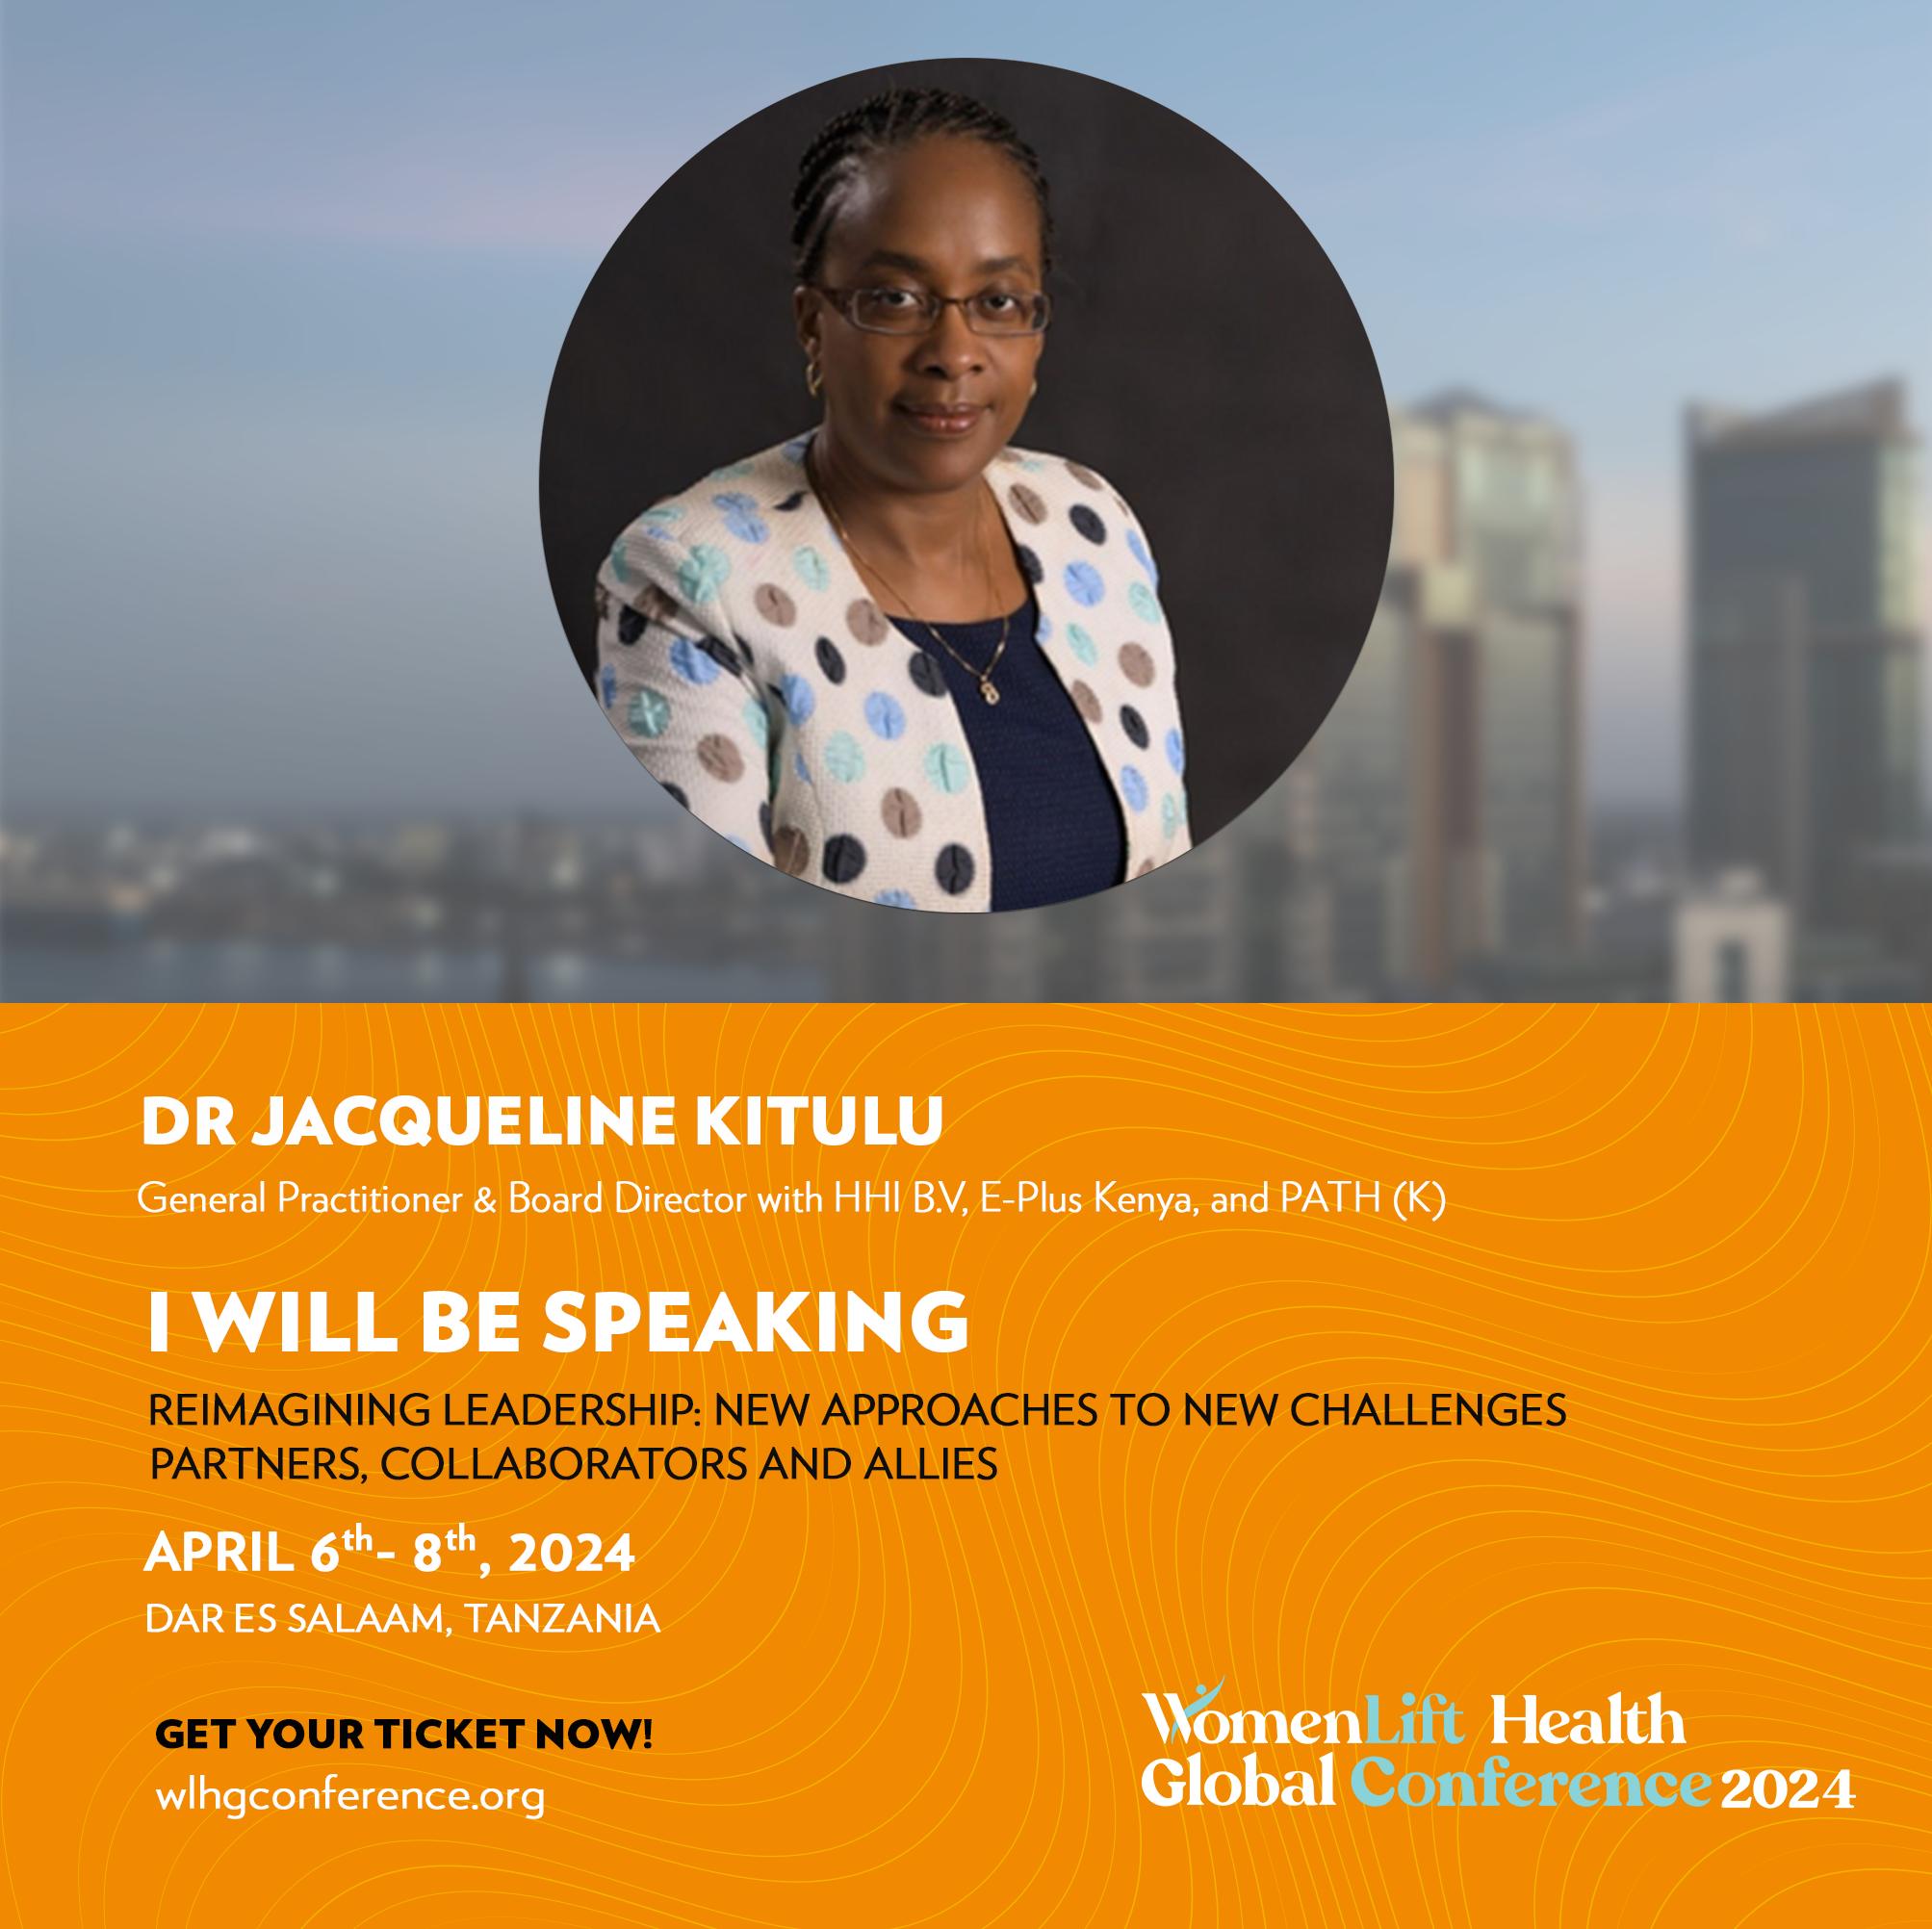 Dr Jacqueline Kitulu will be speaking at the WomenLift Health Global Conference 2024